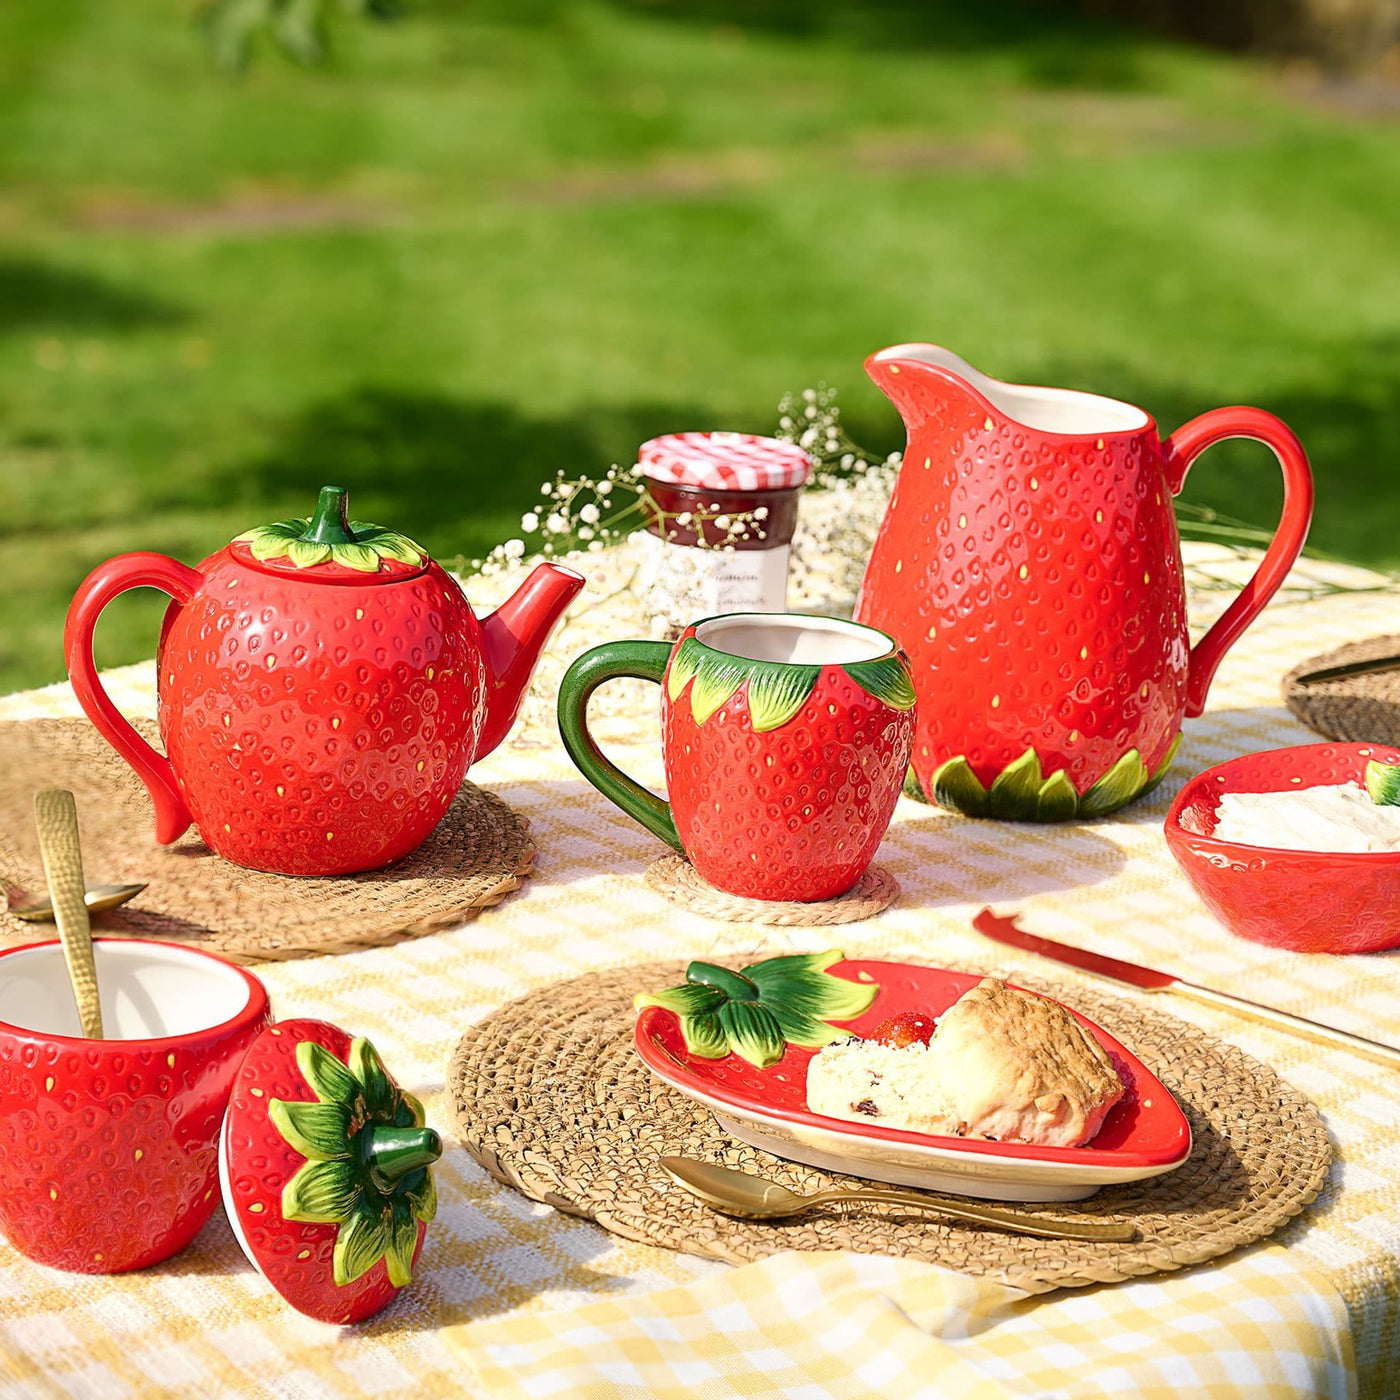 Cottage Garden Strawberry Shaped Plate